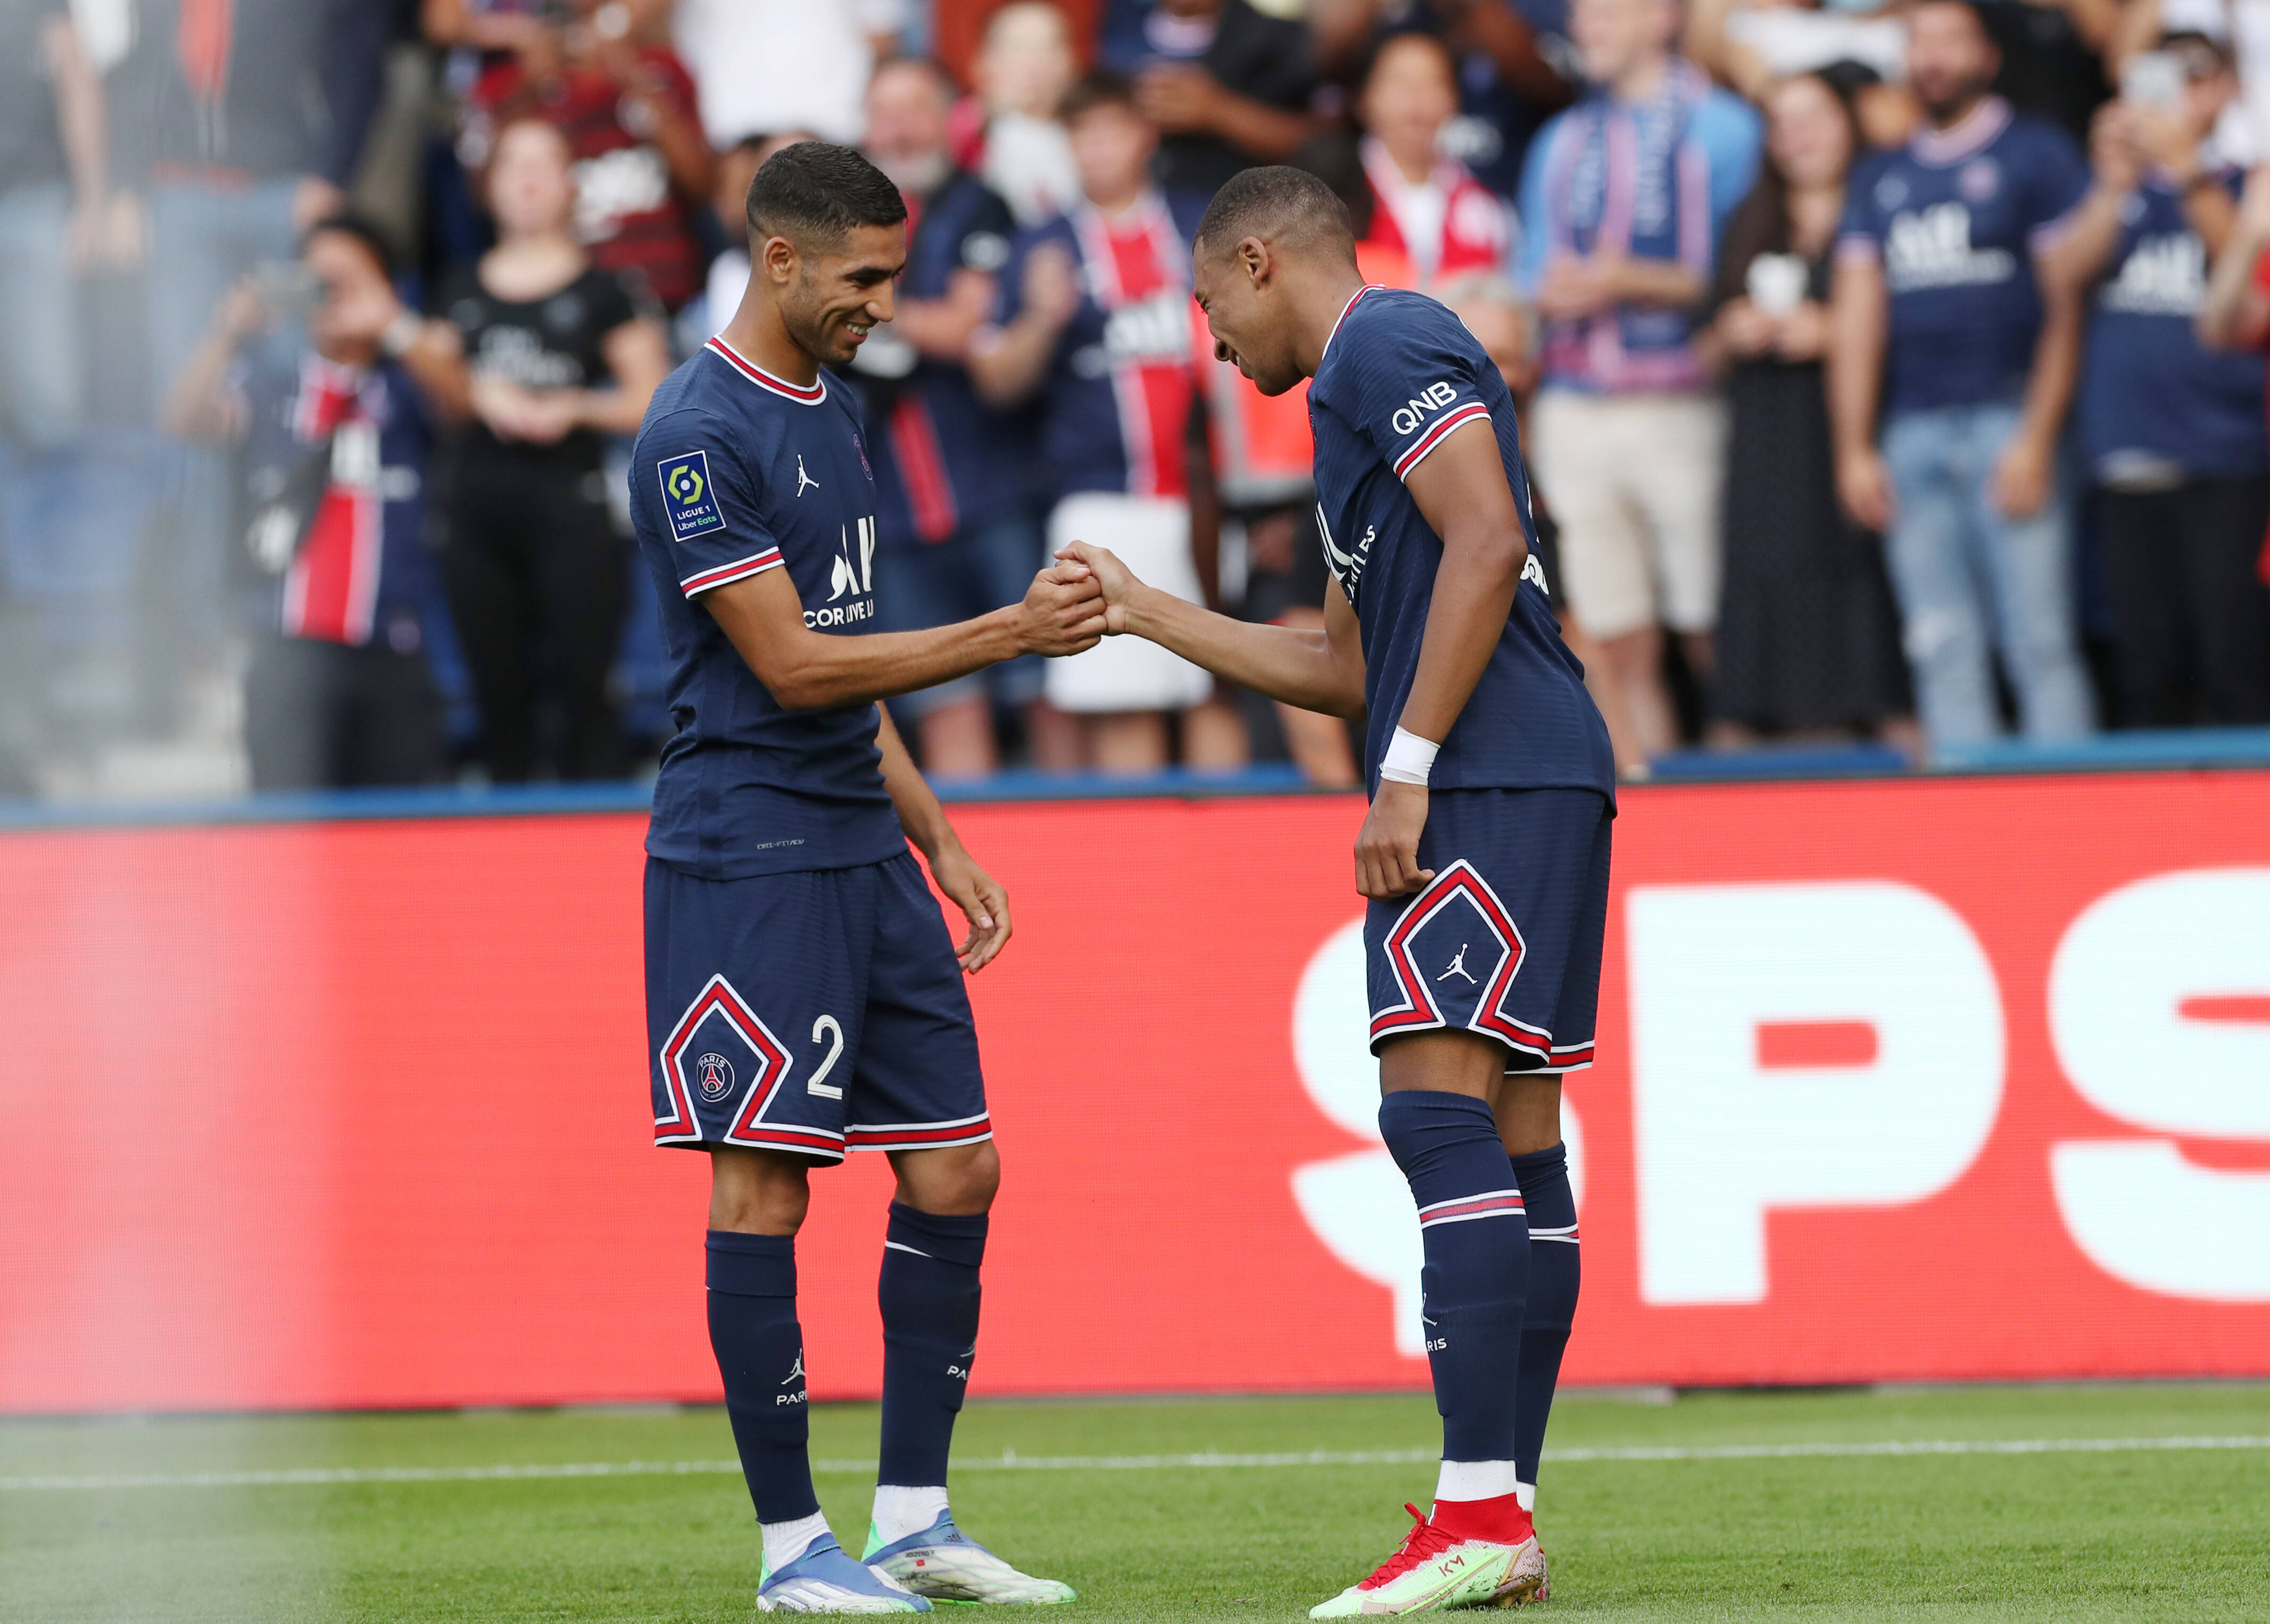 Semifinal day for our 2 Parisians  FRAMAR  K Mbappe  Achraf  Hakimi We are proud   𝗙𝗿𝗼𝗺𝗣𝗮𝗿𝗶𝘀𝗧𝗼𝗤𝗮𝘁𝗮𝗿  rpsg